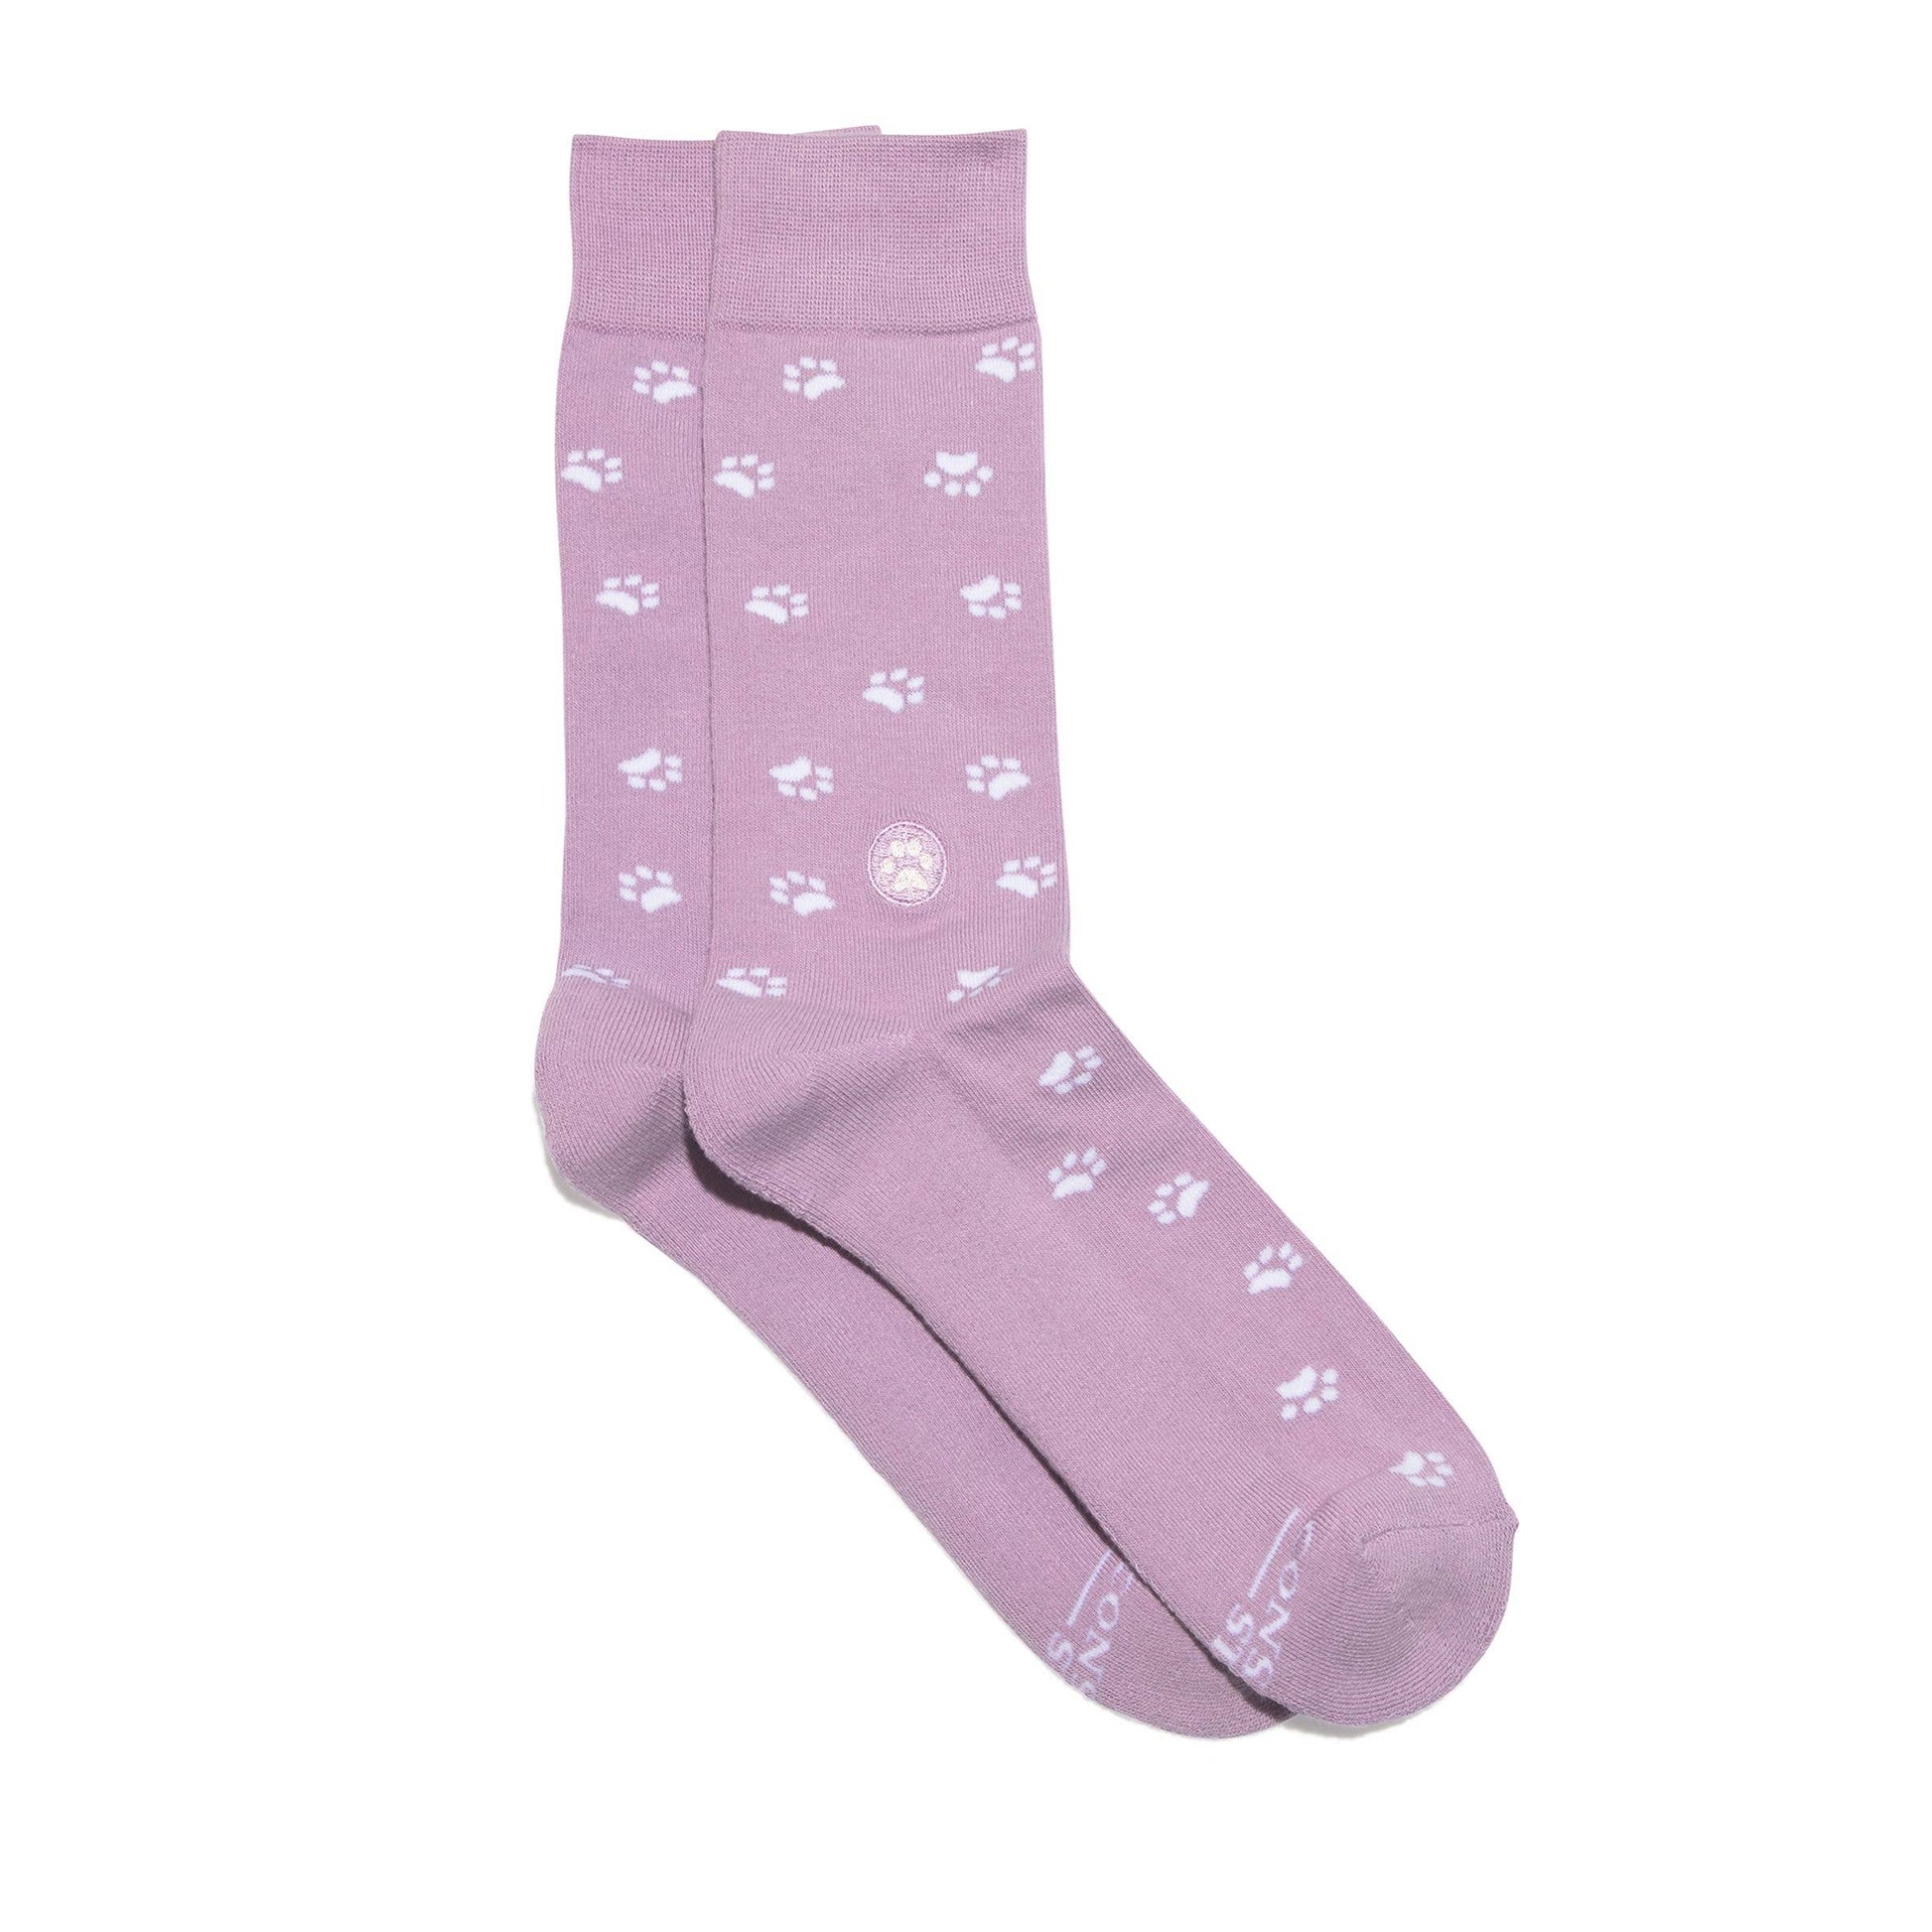 Conscious Step - Socks that Save Dogs (Purple Paw Prints)  Conscious Step   -better made easy-eco-friendly-sustainable-gifting